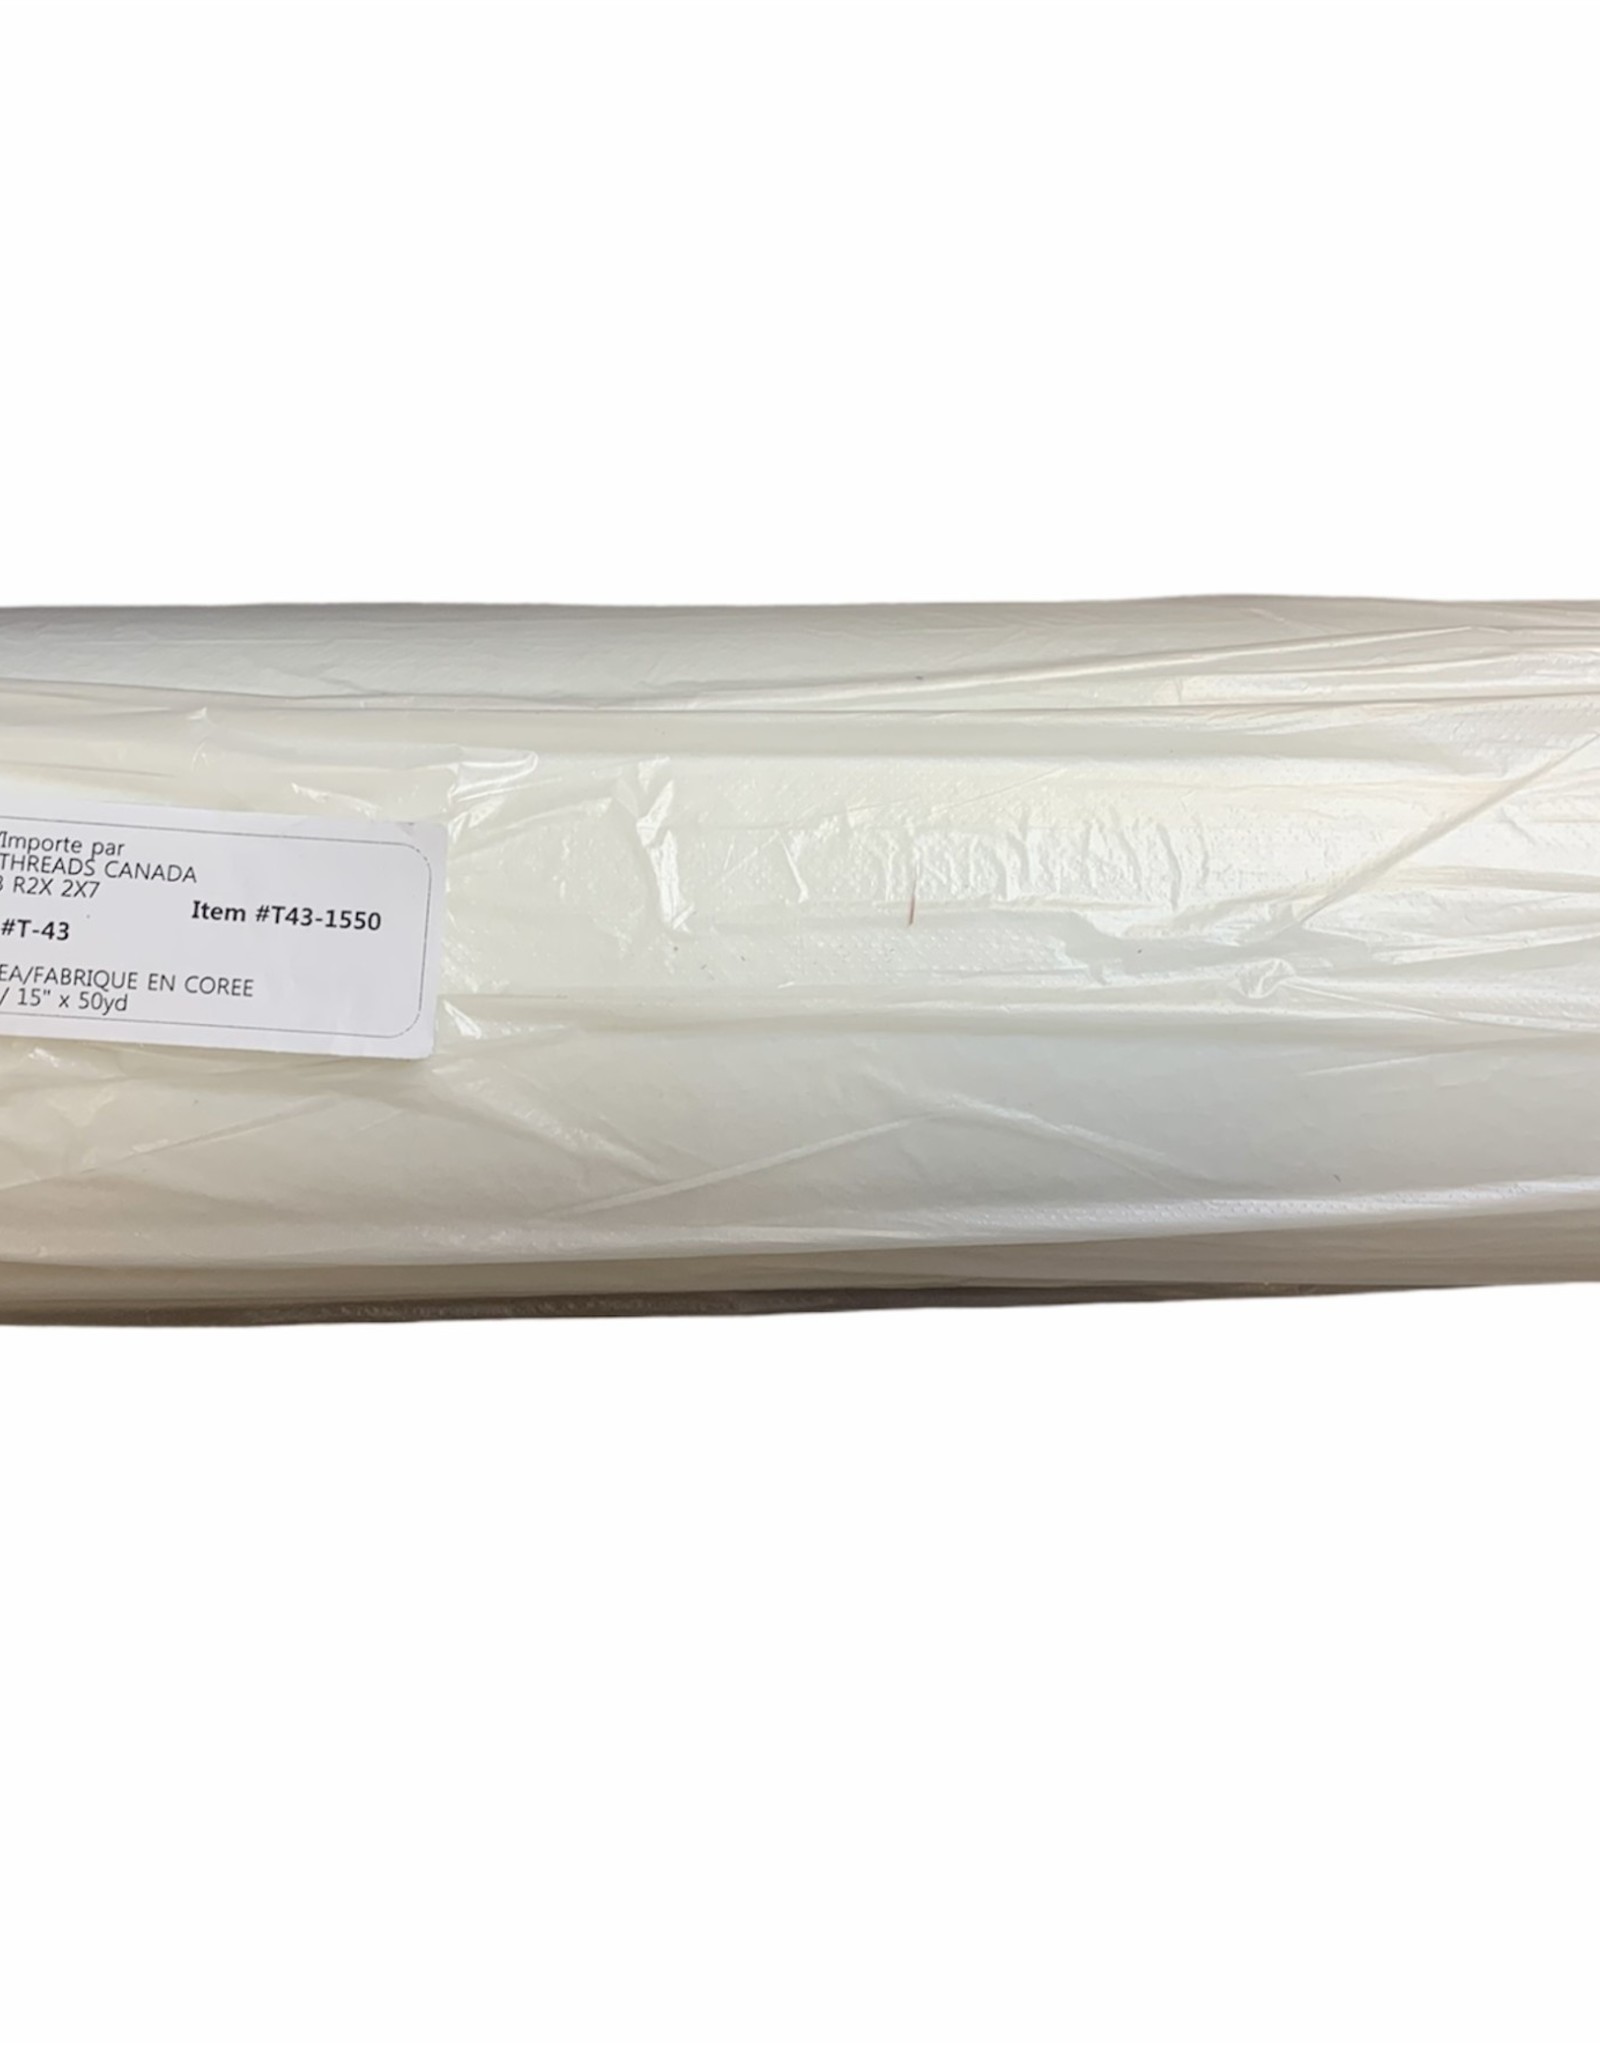 Tearaway Non Woven  T-43 15" x 50 yds